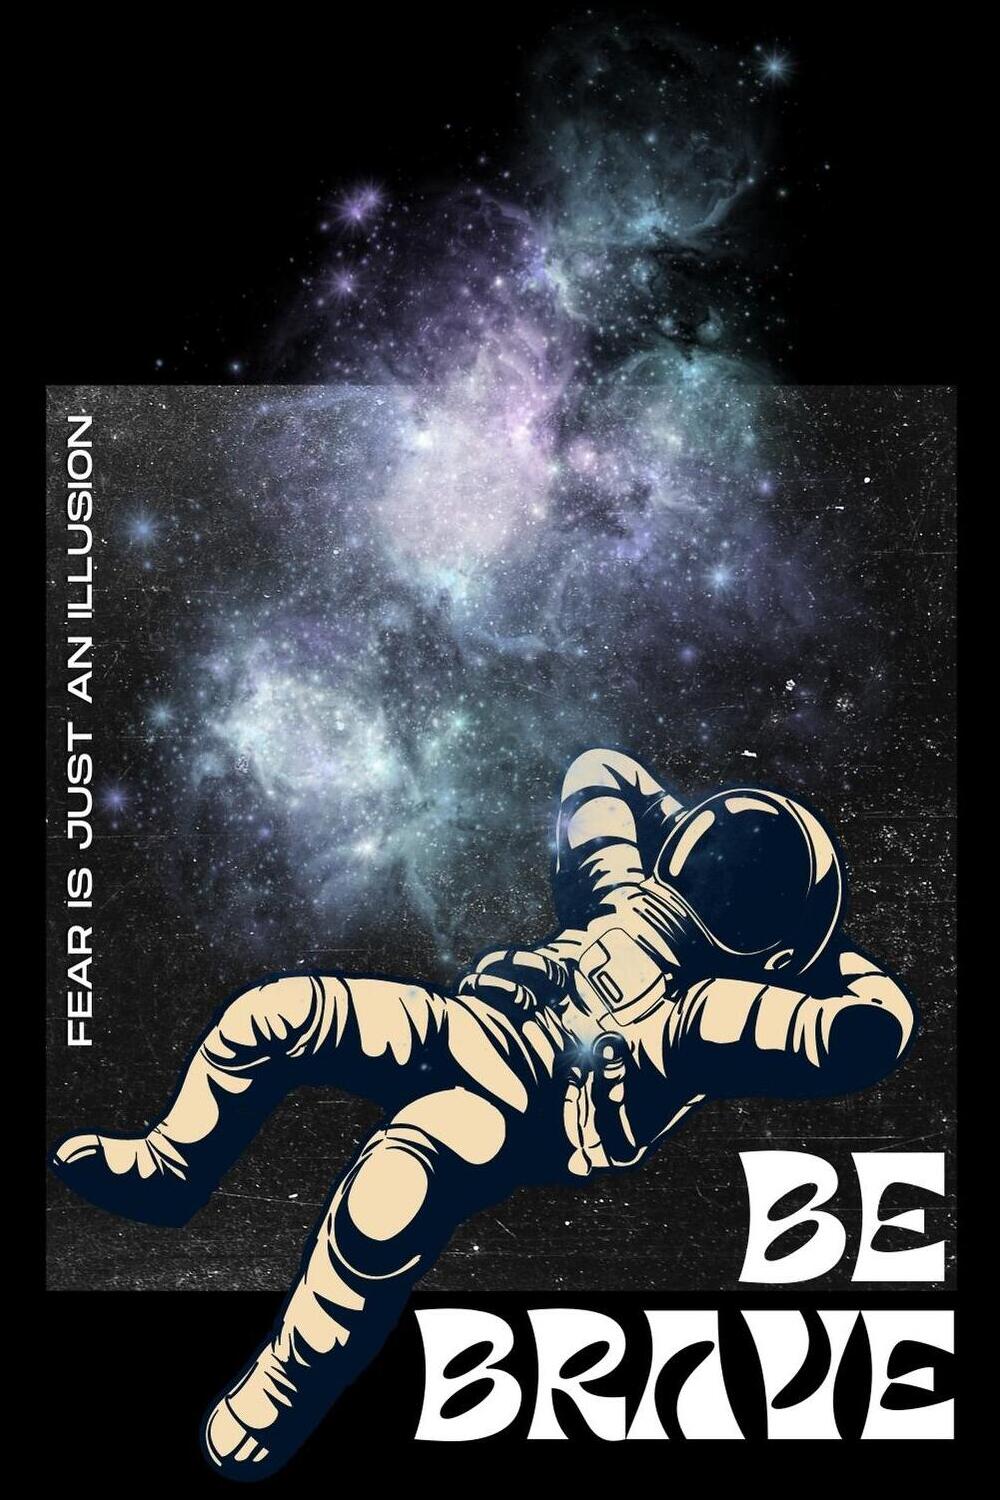 Space Graphic Designs for T-Shirts 4K quality pinterest preview image.